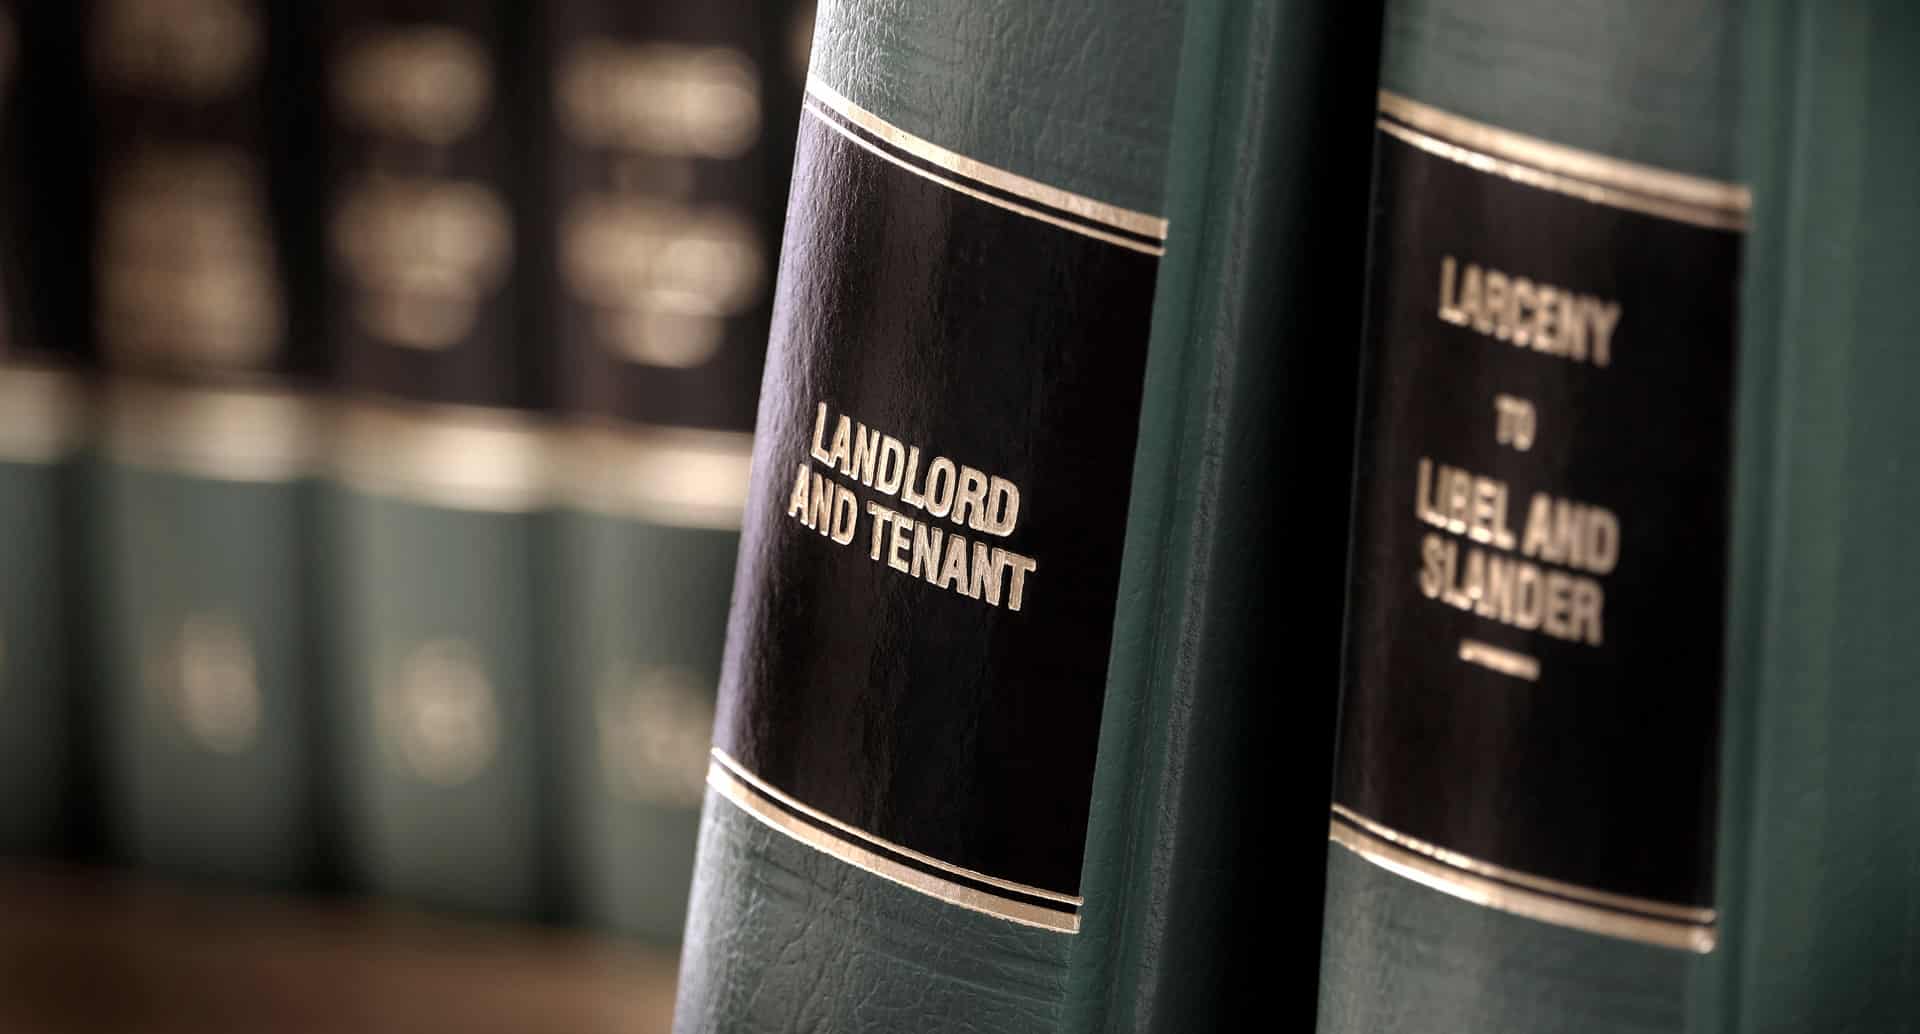 Landlord and tenant law renting or leasing residential property premises